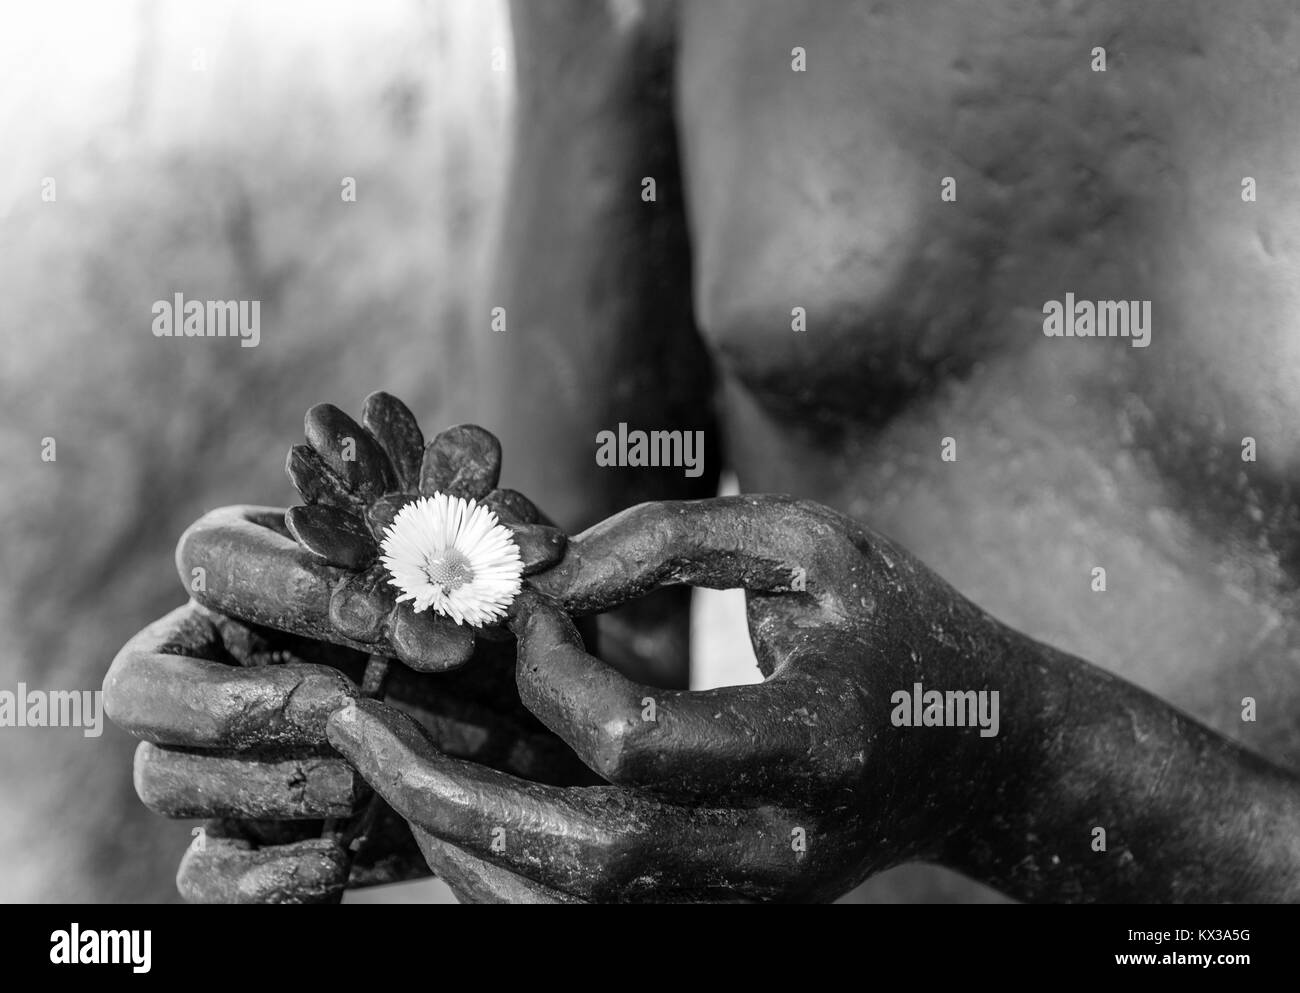 Bronze statue detail of human hands. Image in Black and white Stock Photo